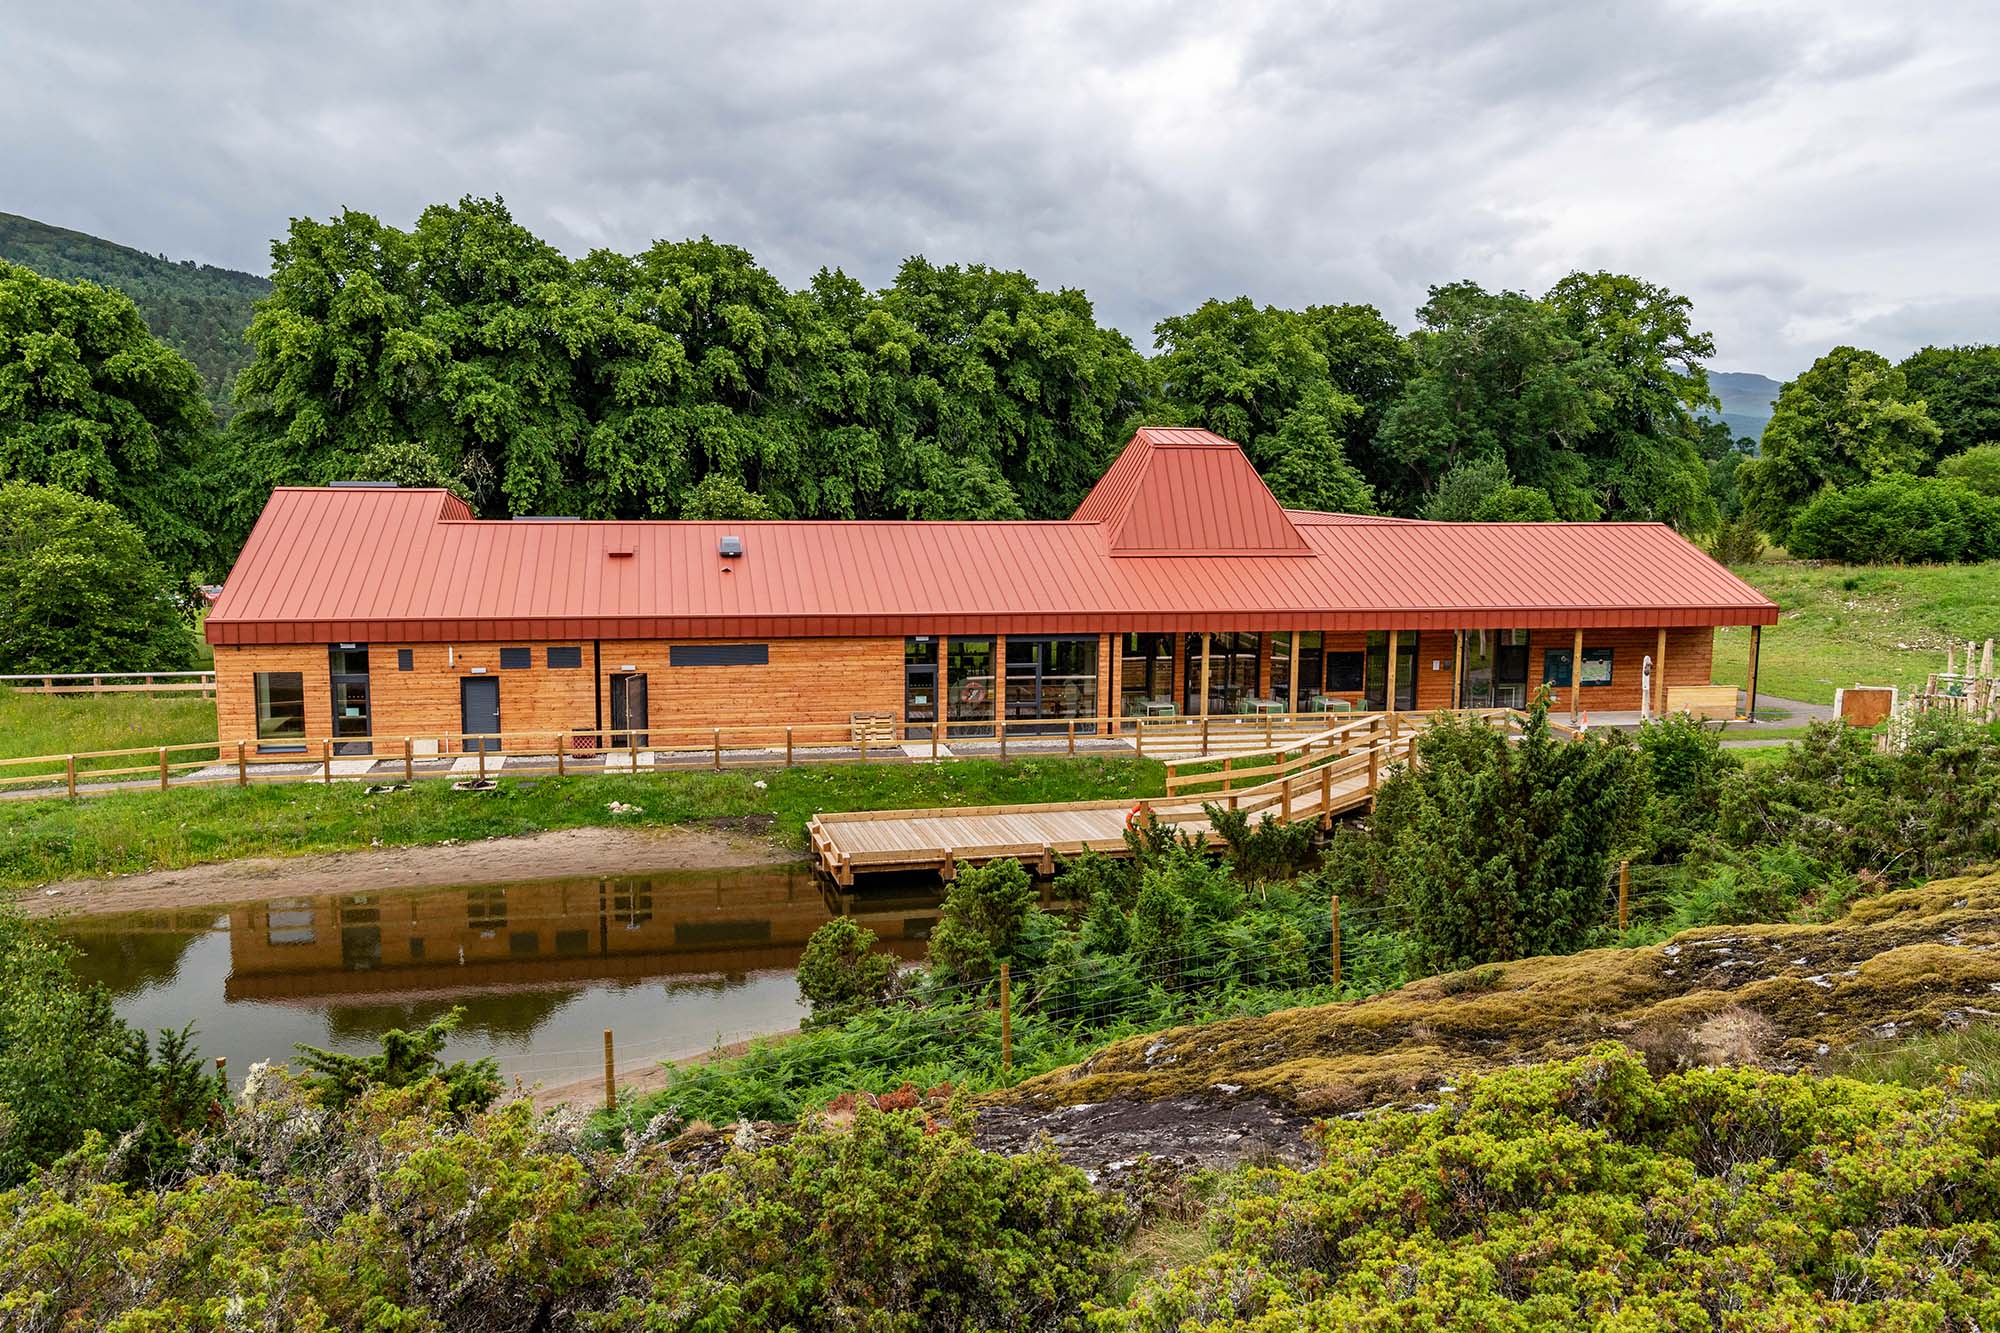 A wood-sided building with red metal roof surrounded by greenery